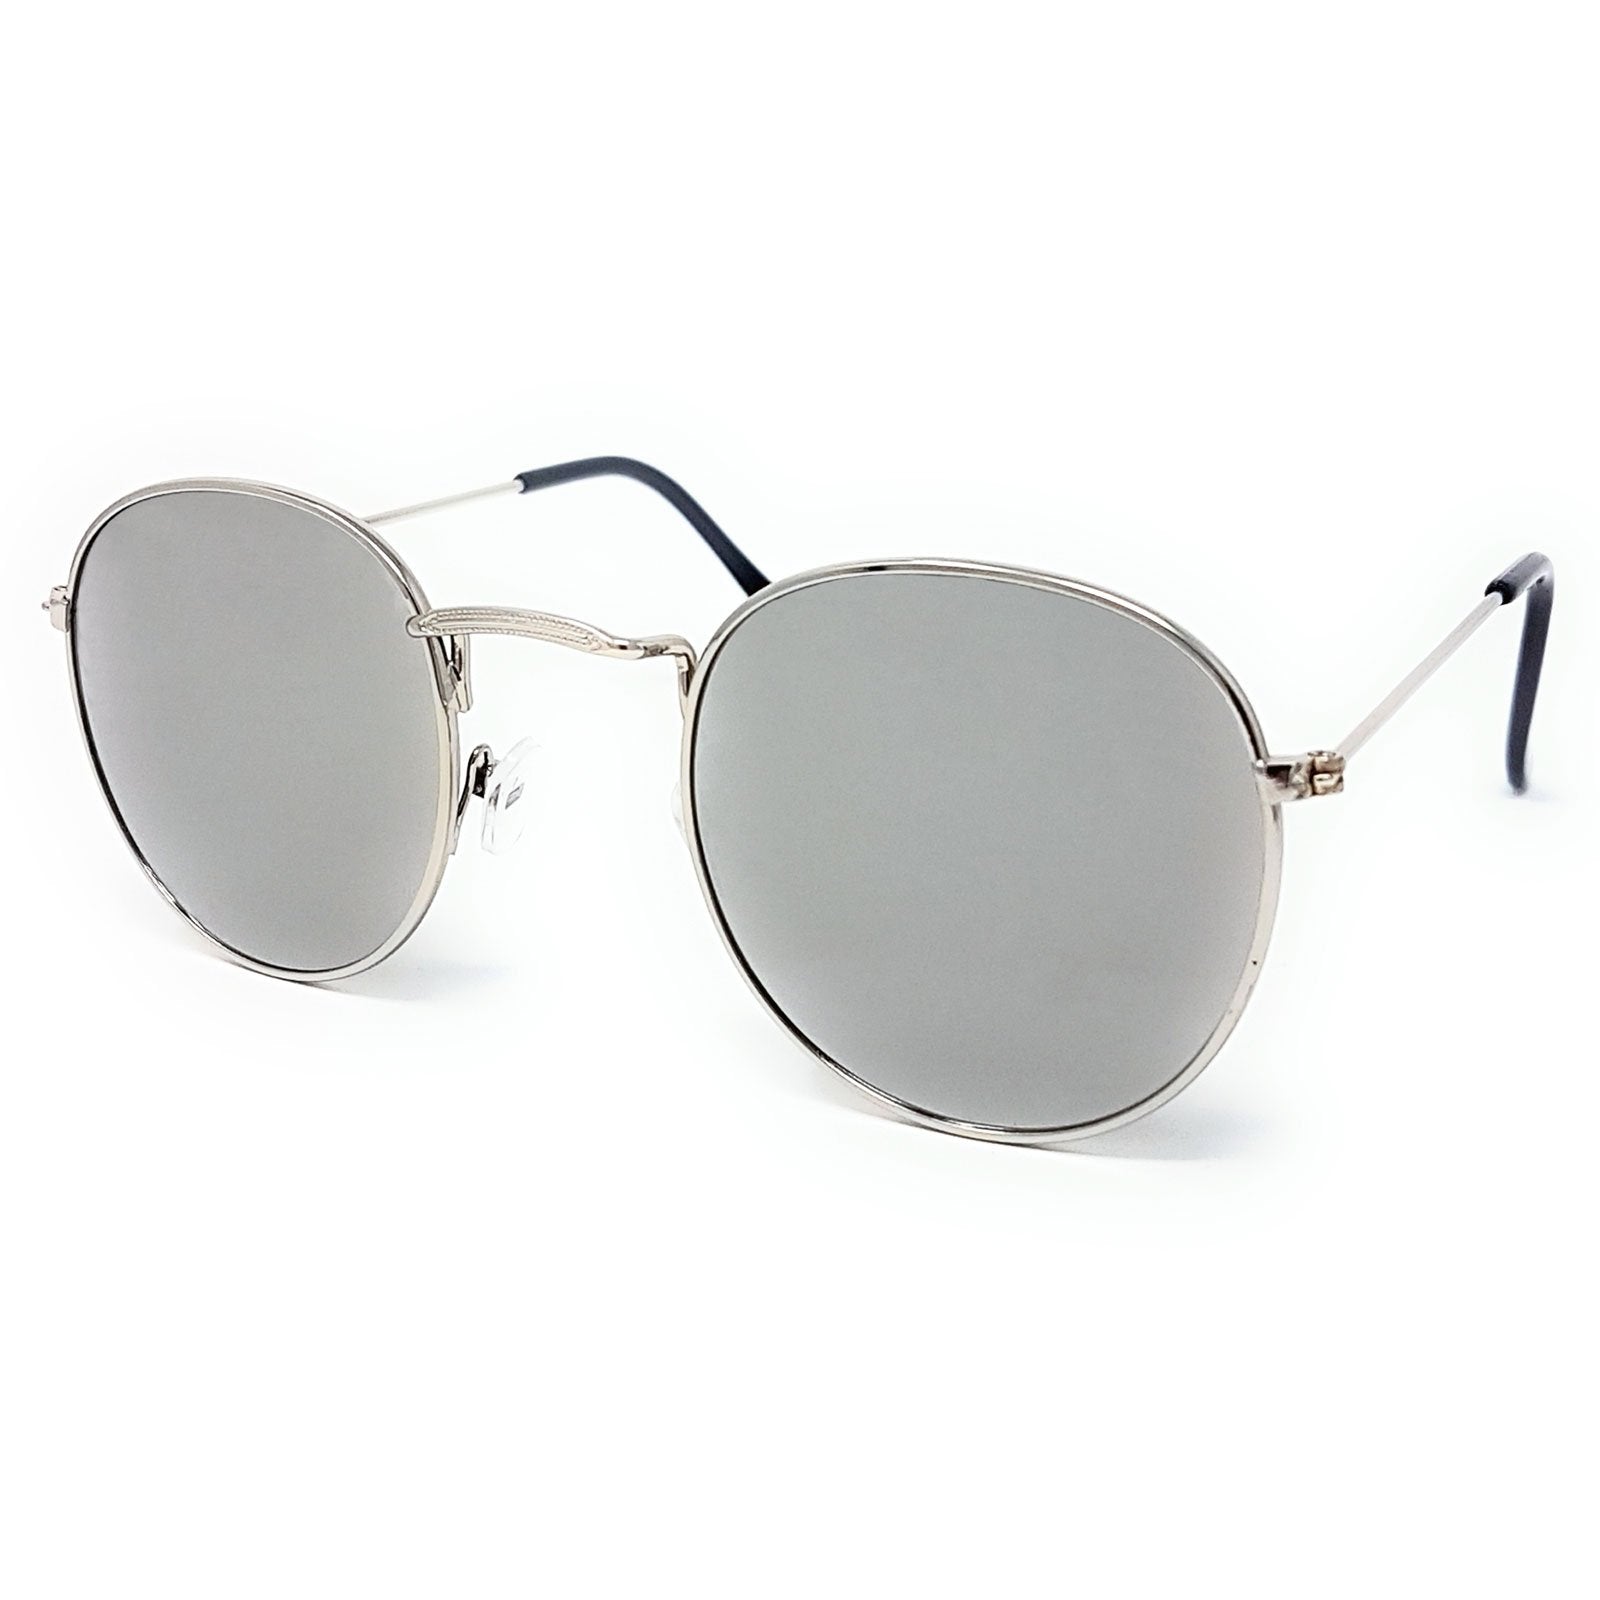 Wholesale Flat Top Round Lens Sunglasses - Silver Frame, Silver Mirrored Lens